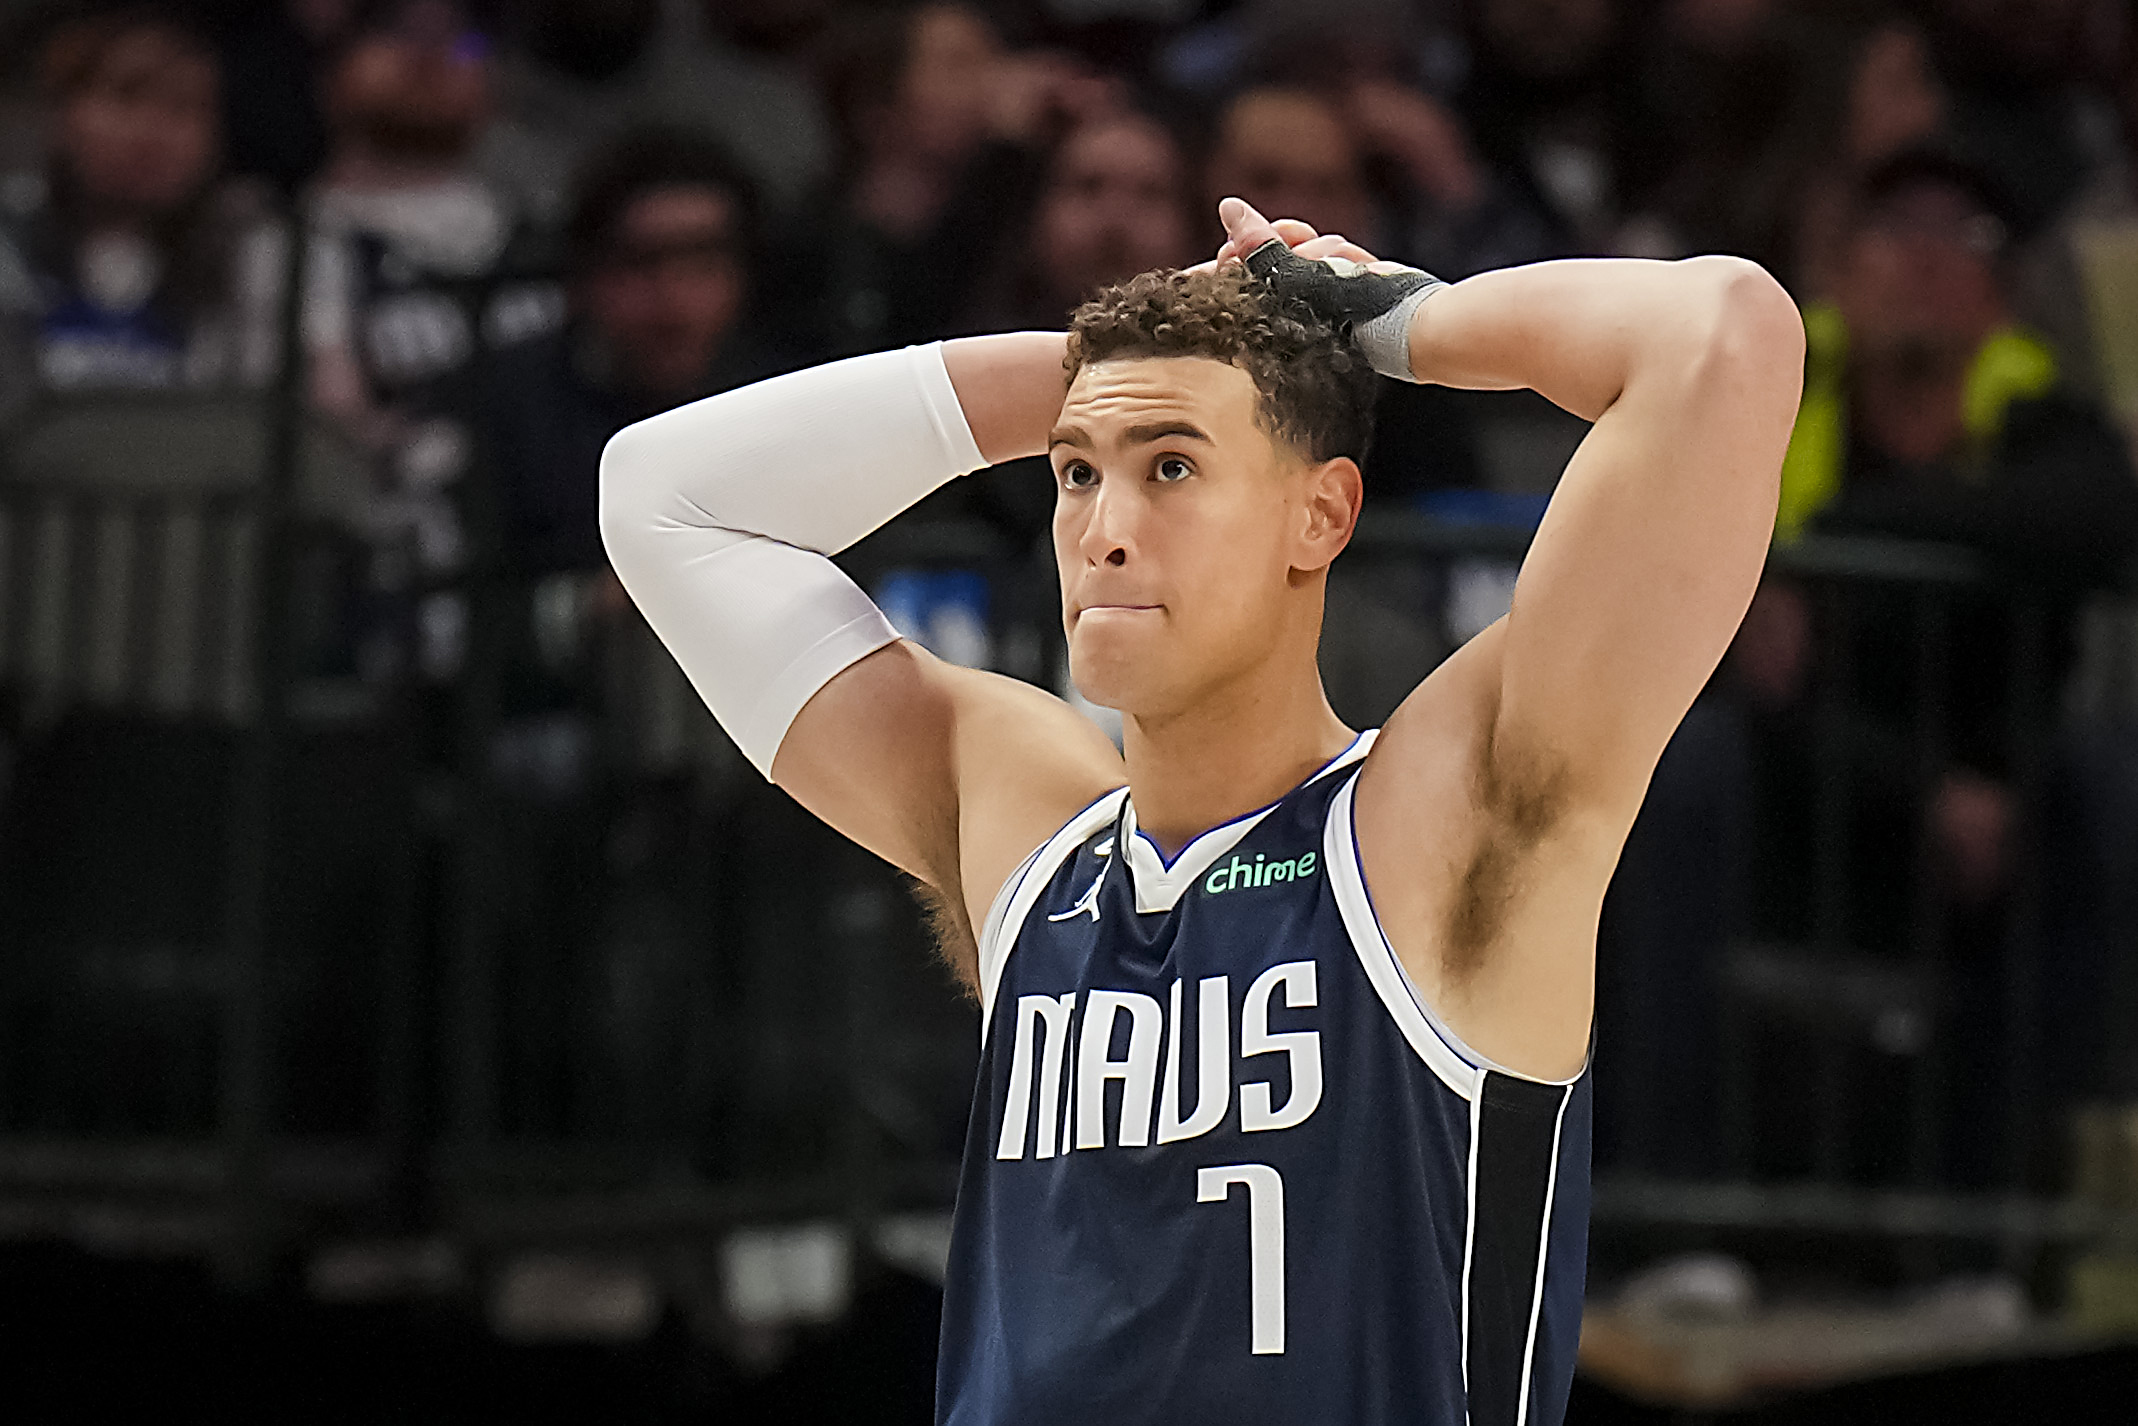 Mavericks player preview: Dwight Powell will continue giving his